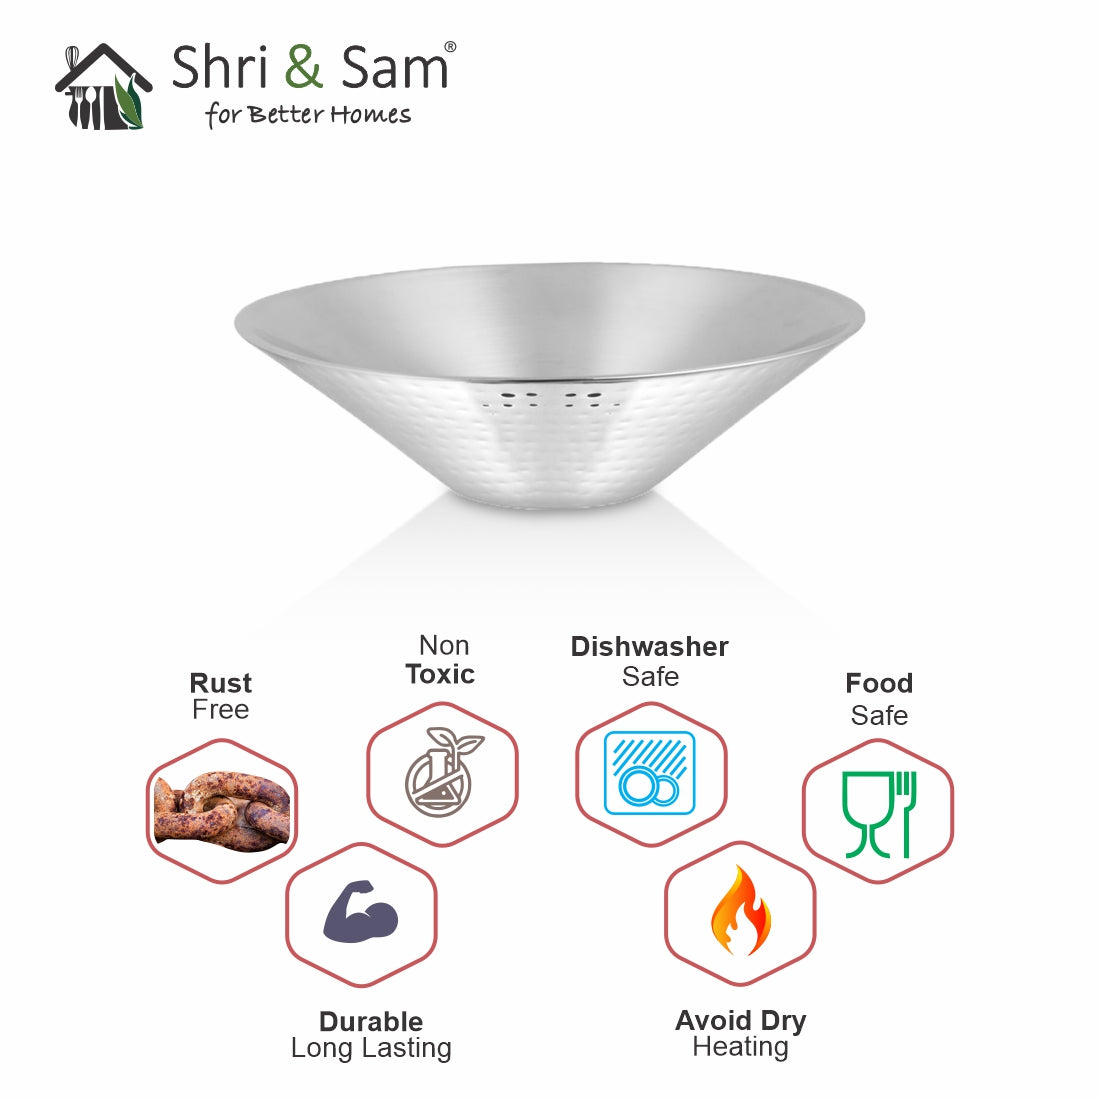 Stainless Steel Hammered Salad Bowl Conic